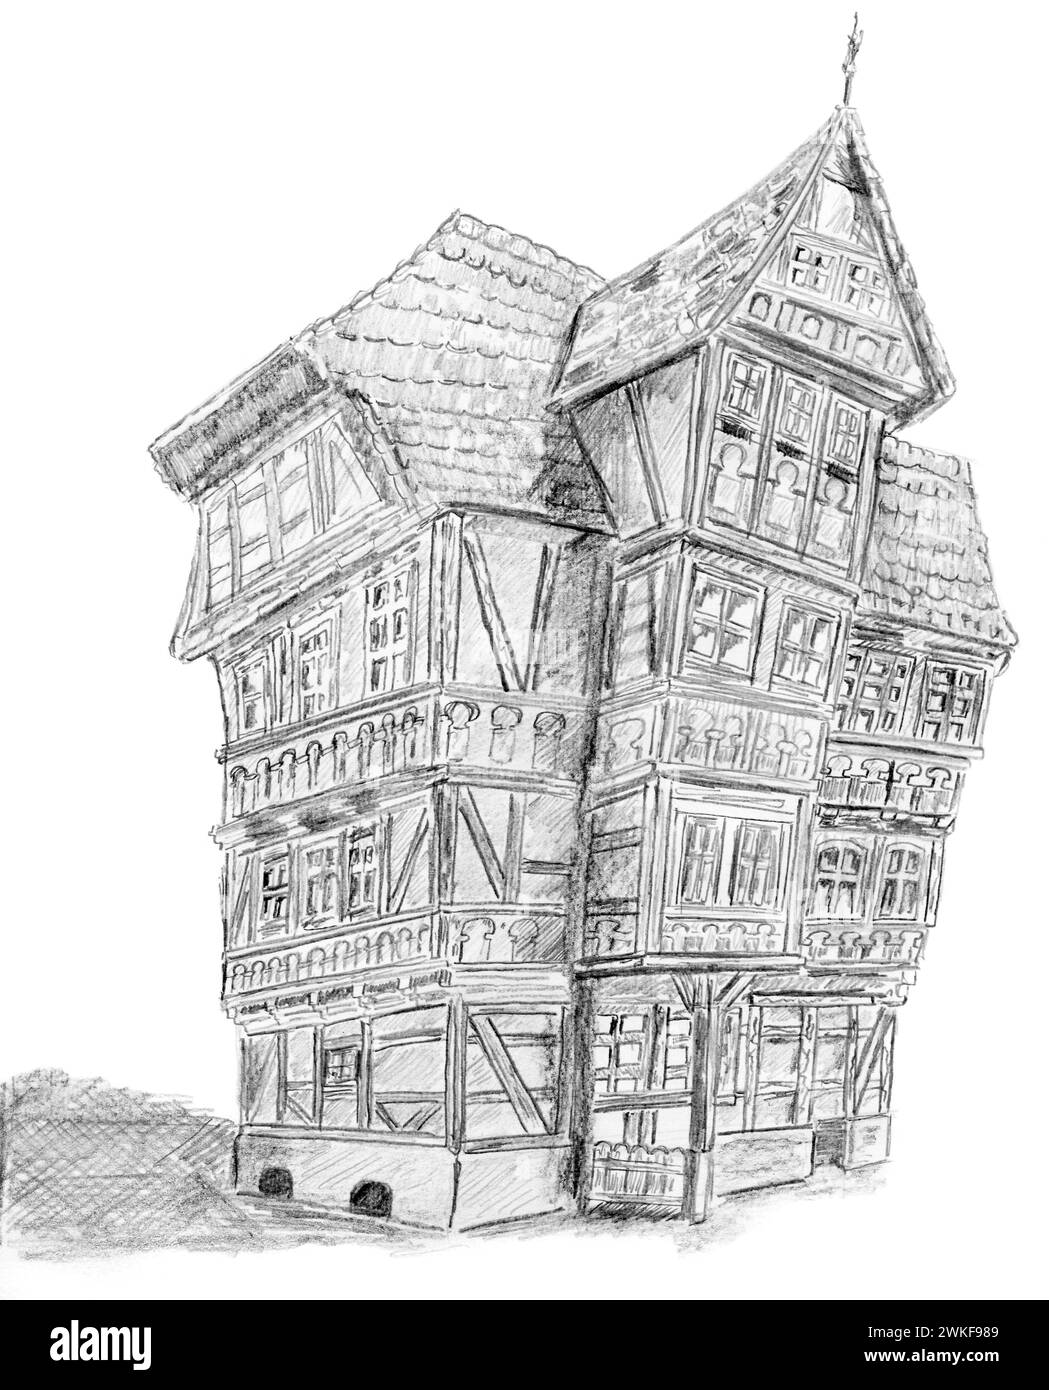 Pencil sketch of a medieval half-timbered house on a white paper background. Photographer is Artist of this work. Stock Photo